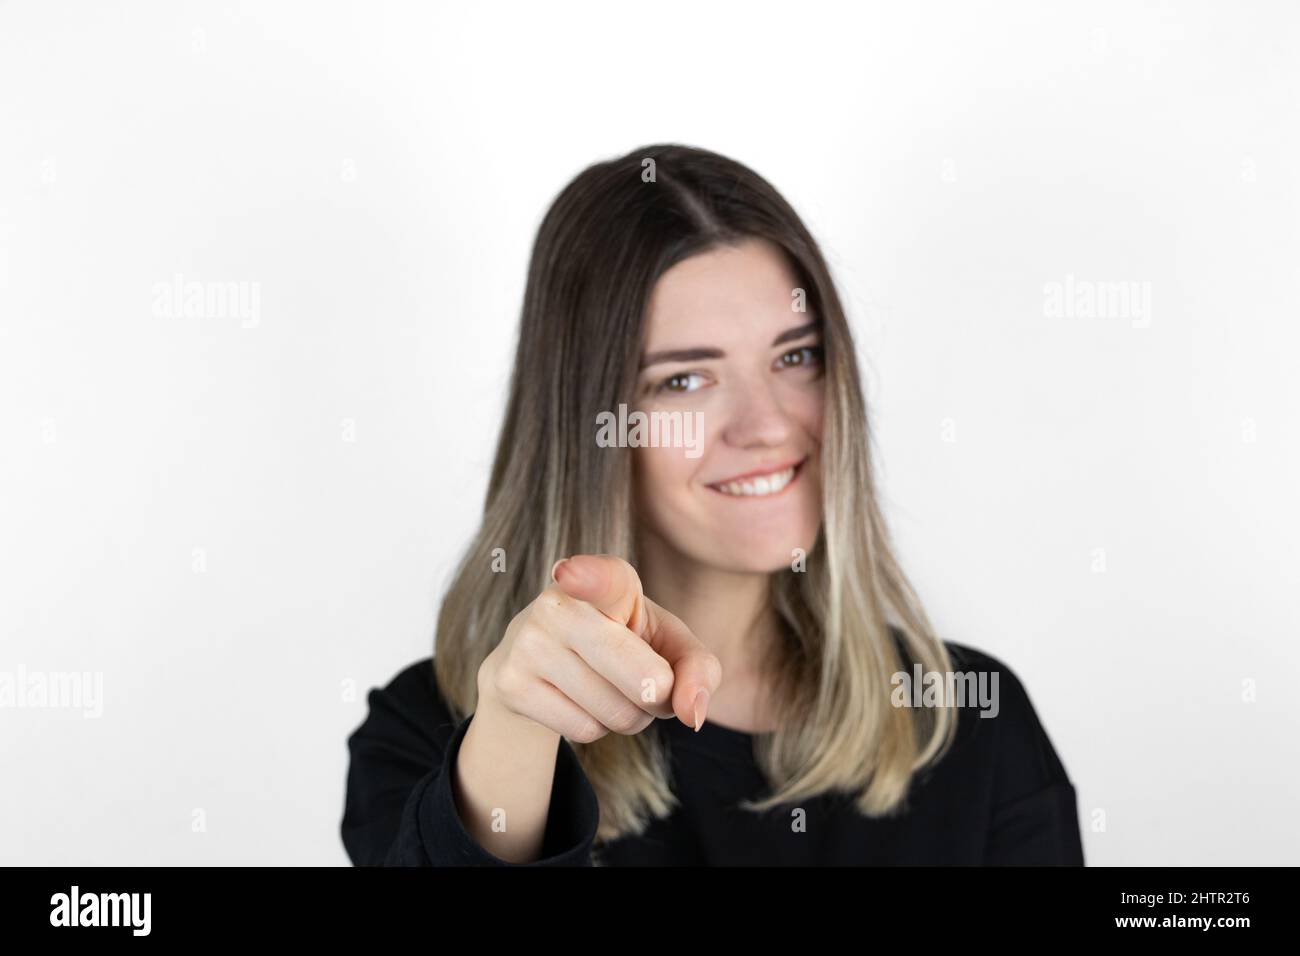 Positive cheerful young woman smiling pointing at camera with index fingers. Facial emotion. Success in life or studies. Stock Photo